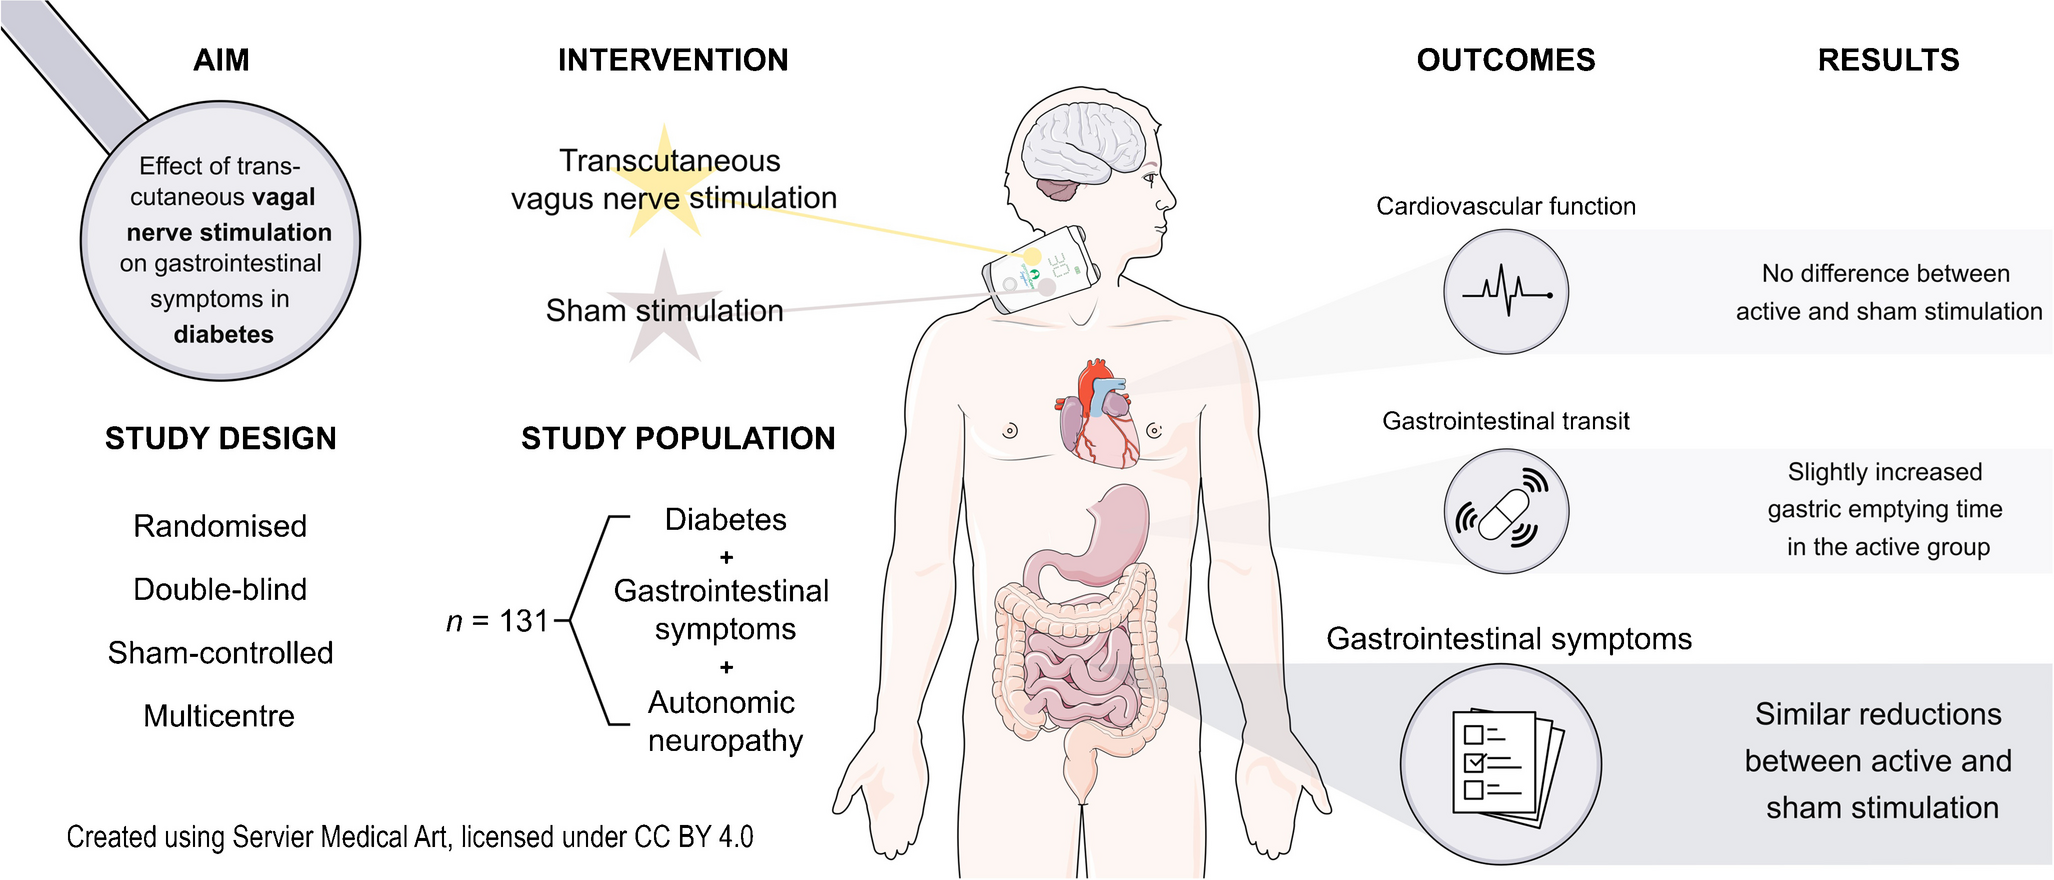 Transcutaneous vagal nerve stimulation for treating gastrointestinal symptoms in individuals with diabetes: a randomised, double-blind, sham-controlled, multicentre trial